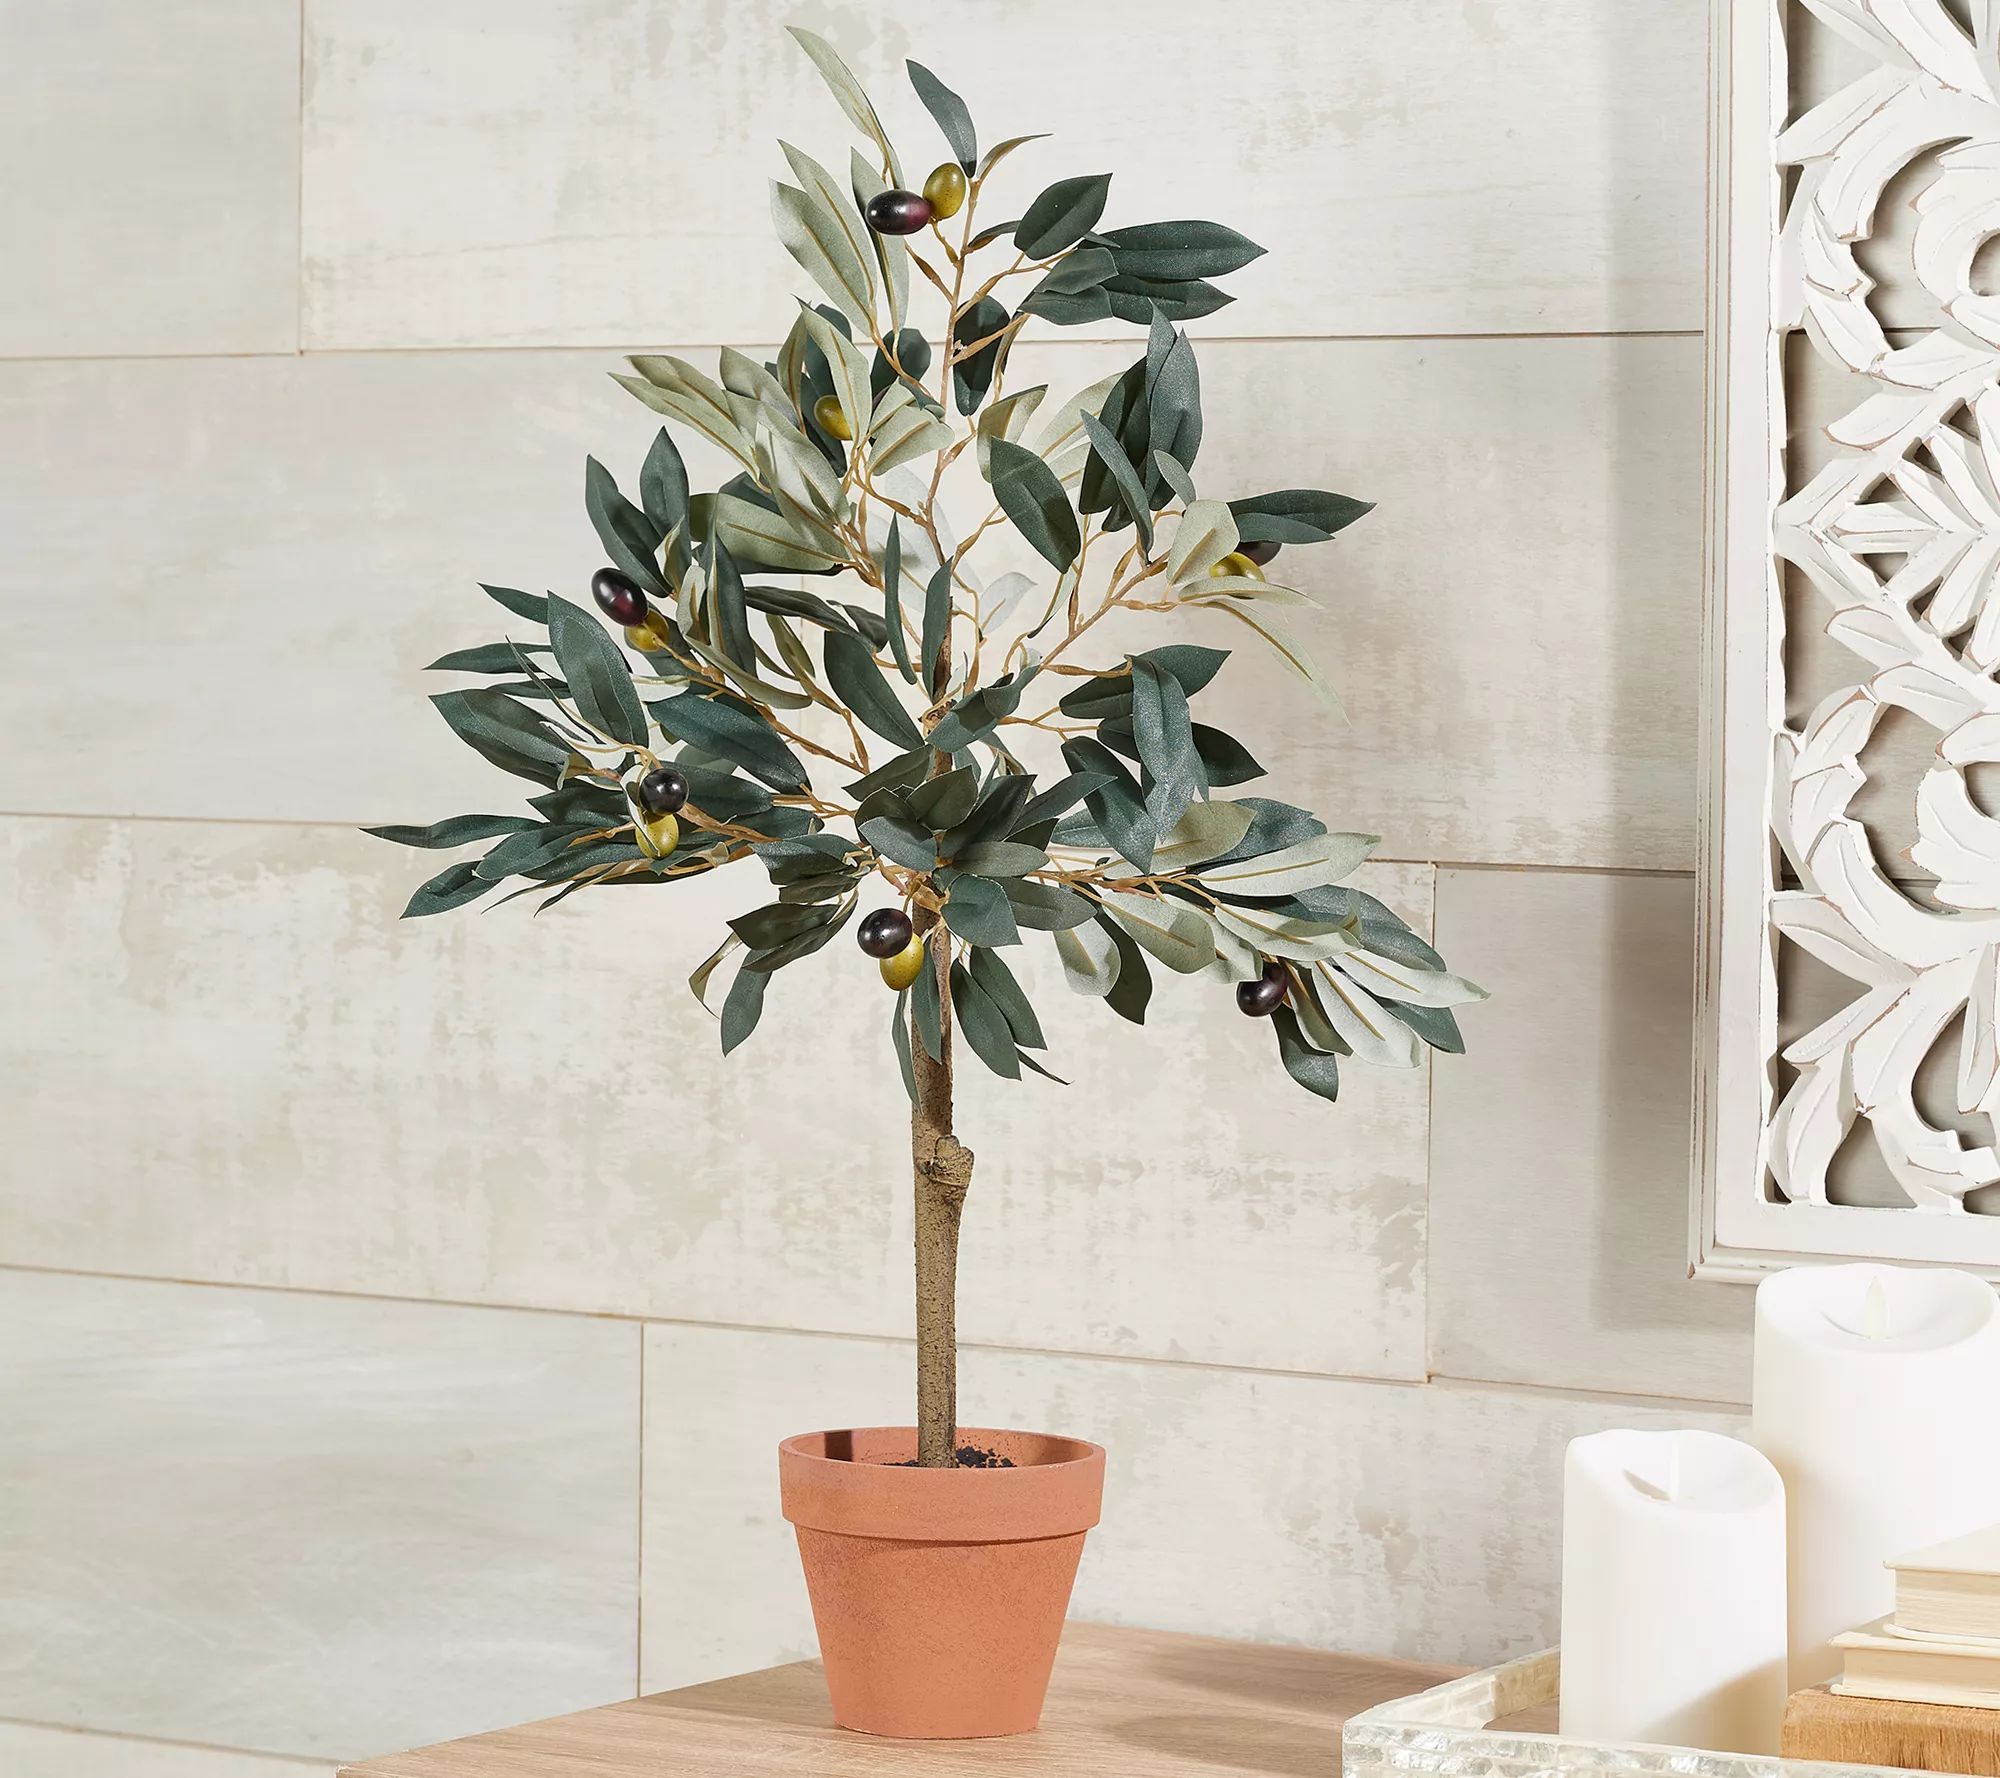 24" Faux Tabletop Olive Tree in Pot by Valerie - QVC.com | QVC